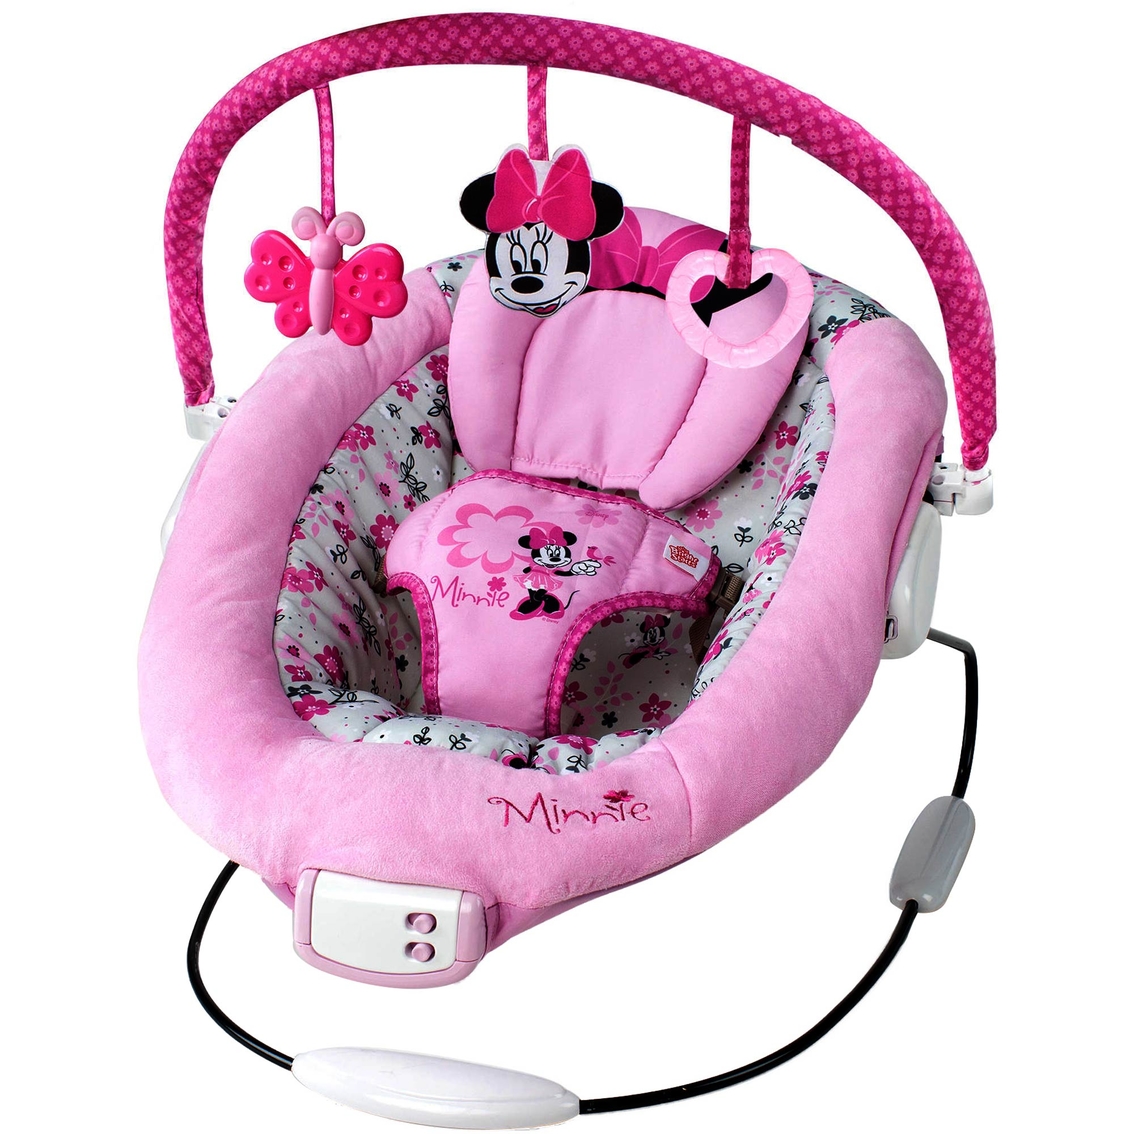 disney baby minnie mouse garden delights swing